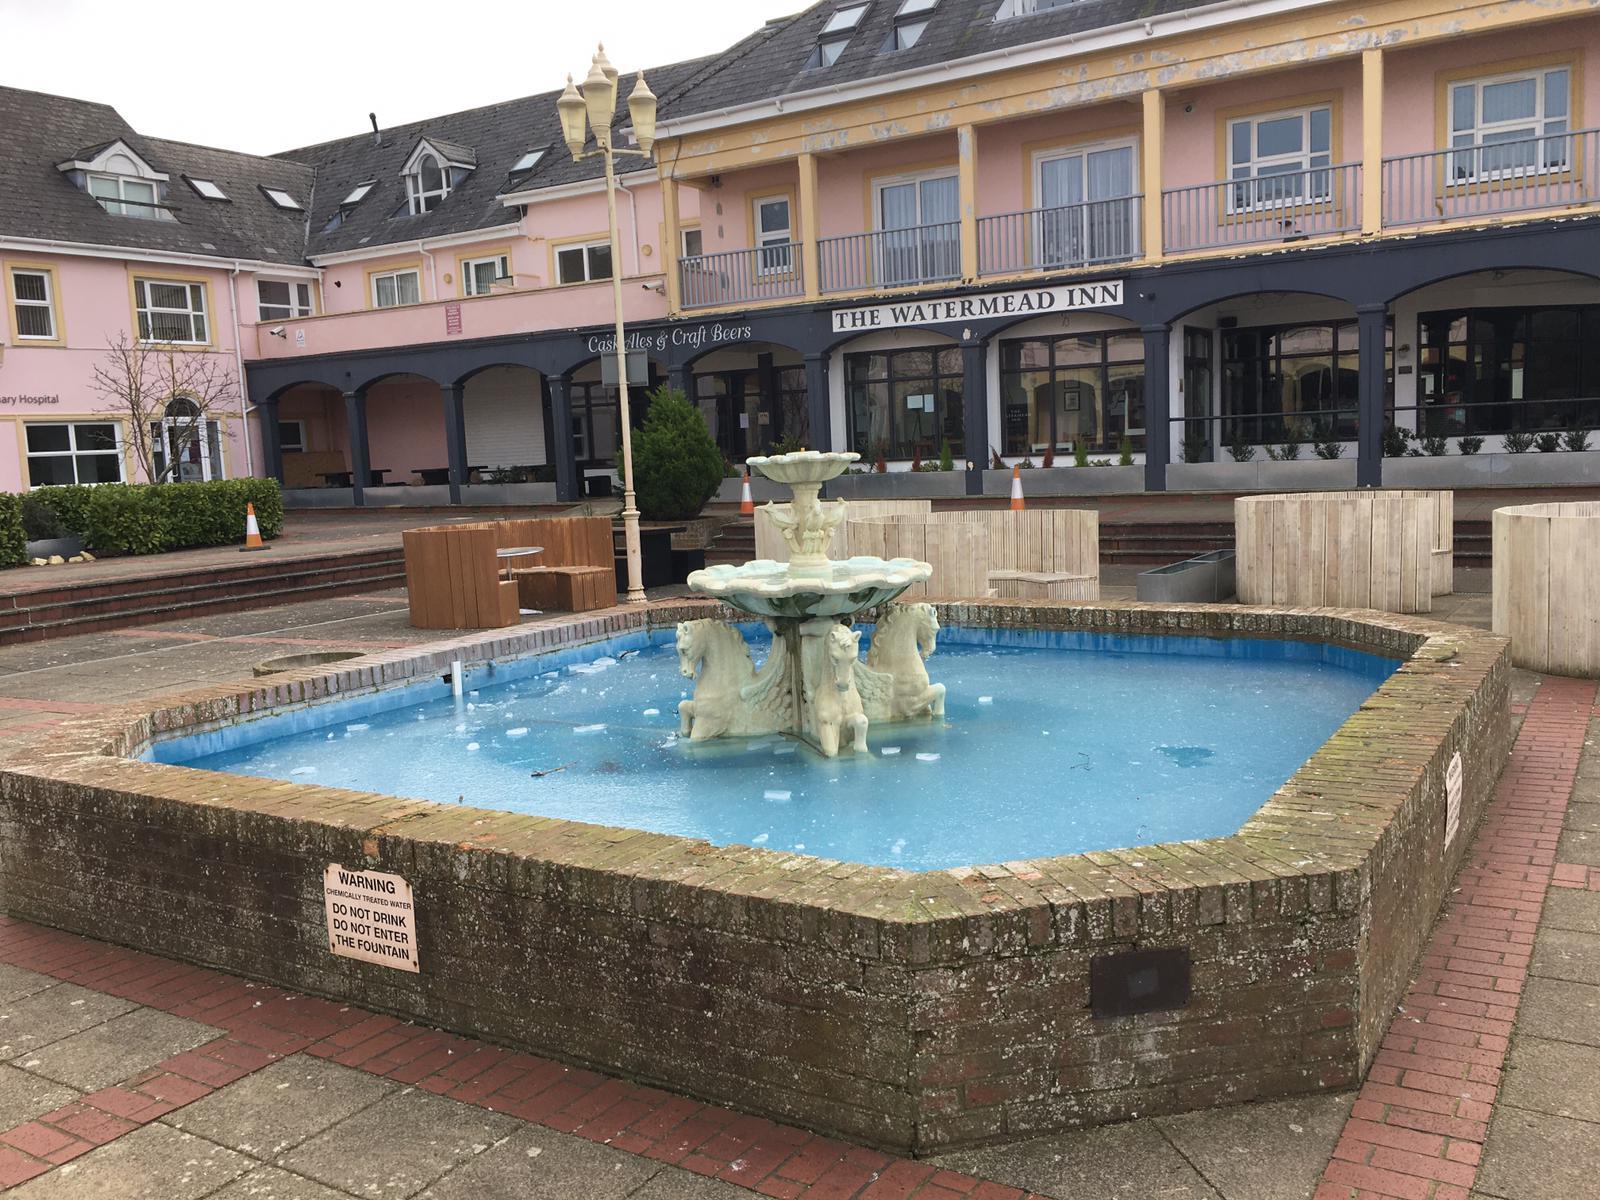 The fountain in Watermead was frozen over 